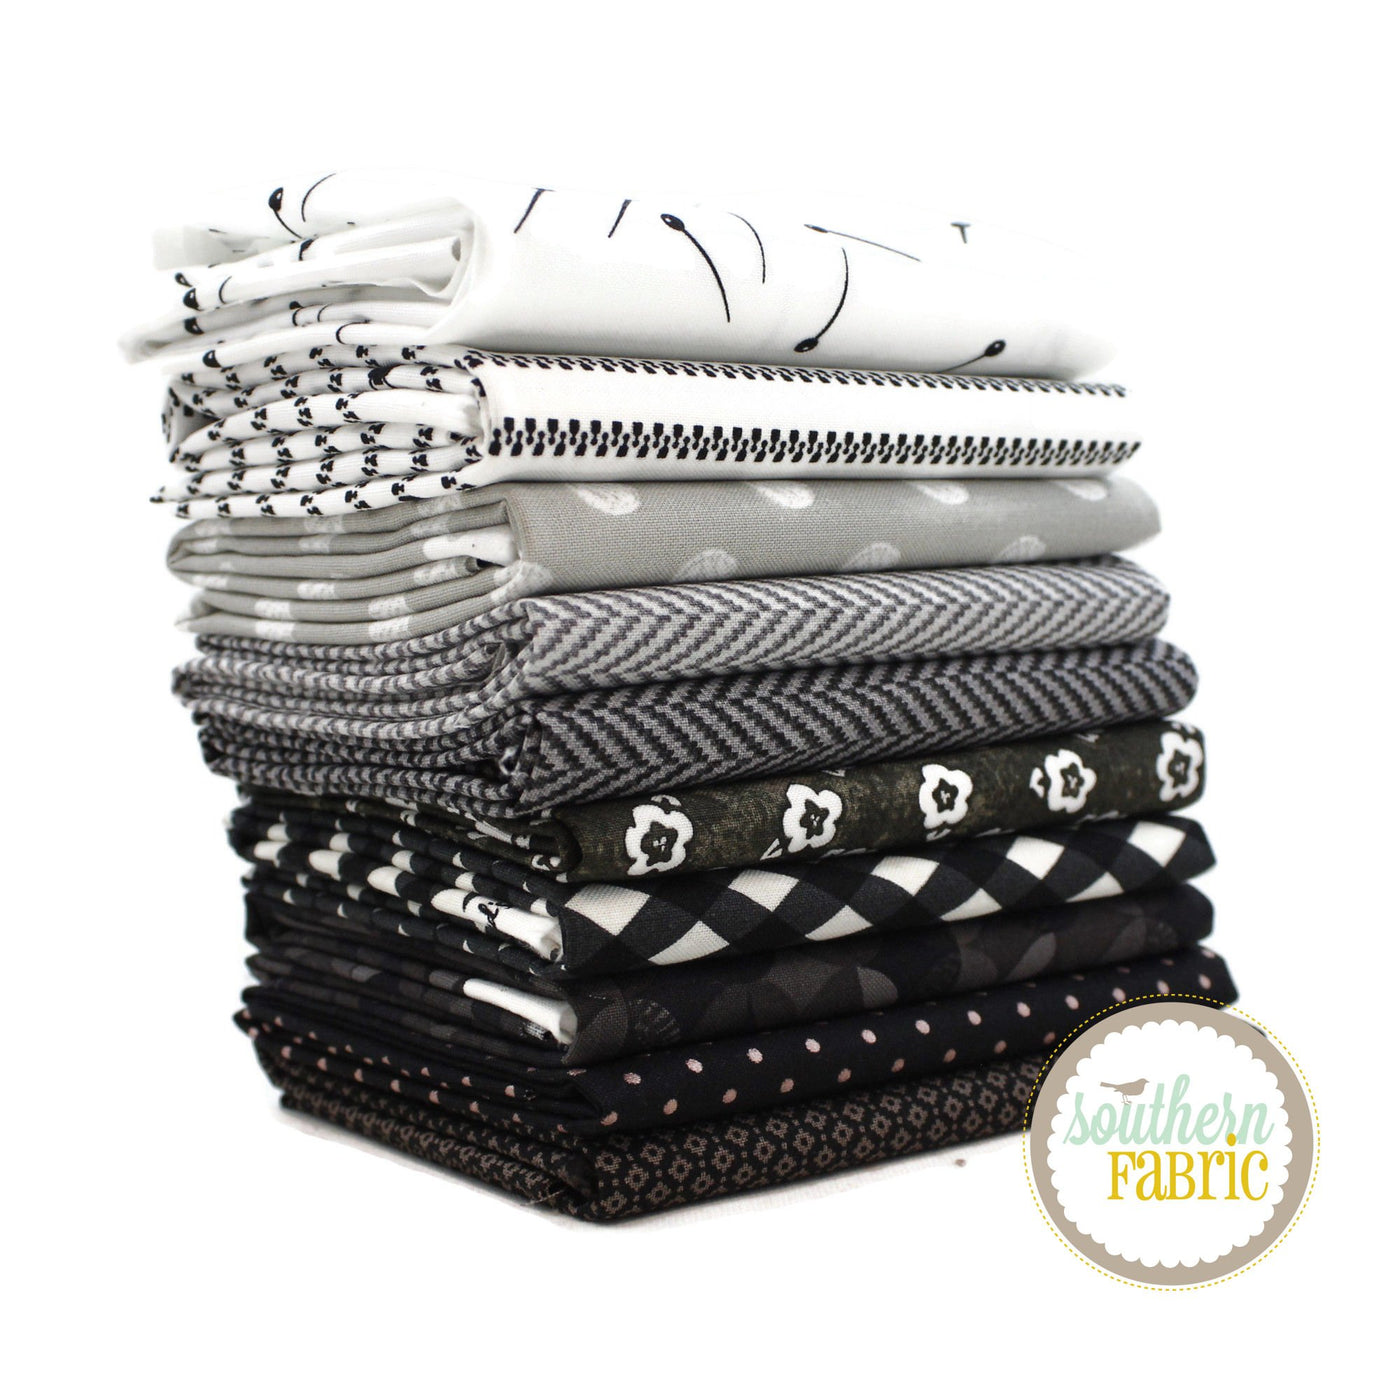 Black, White, and Grey Fat Quarter Bundle (10 pcs) by Mixed Designers for Southern Fabric